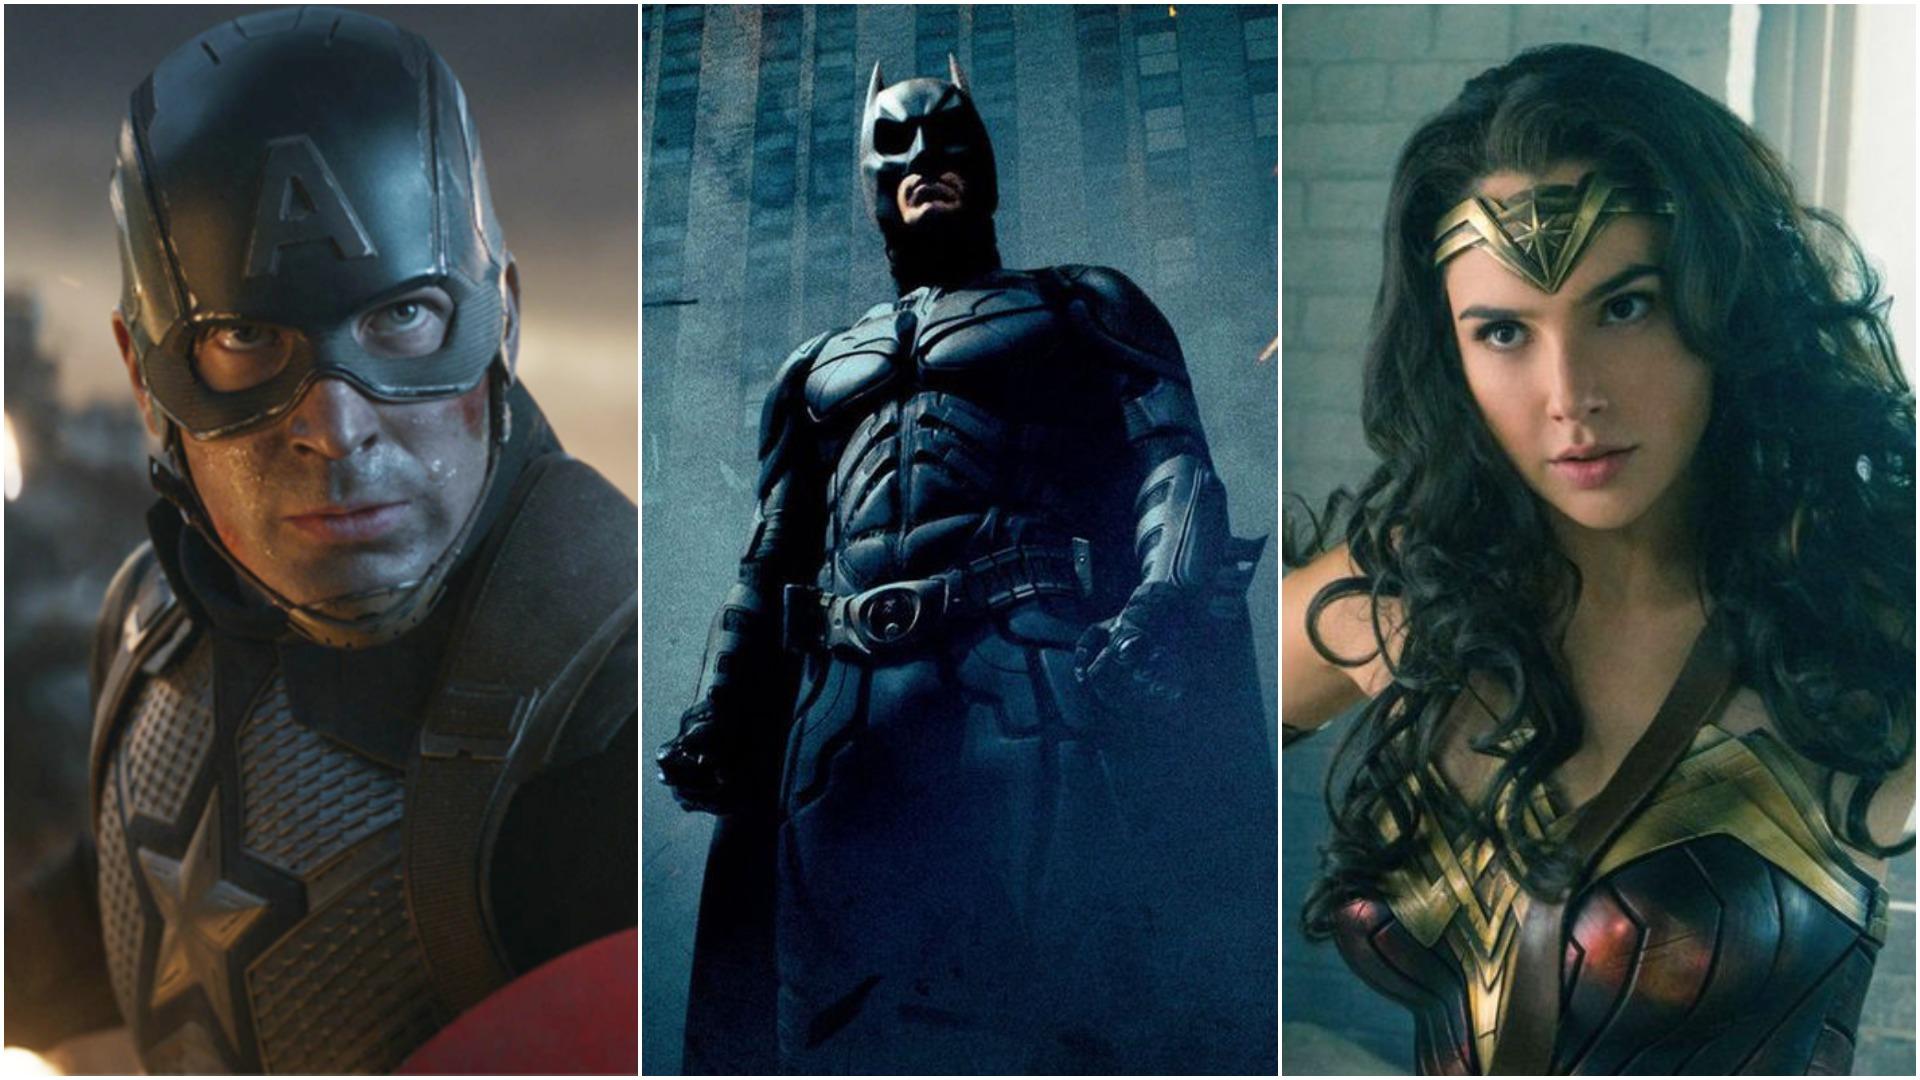 The 25 best superhero movies of all time, ranked! From Avengers